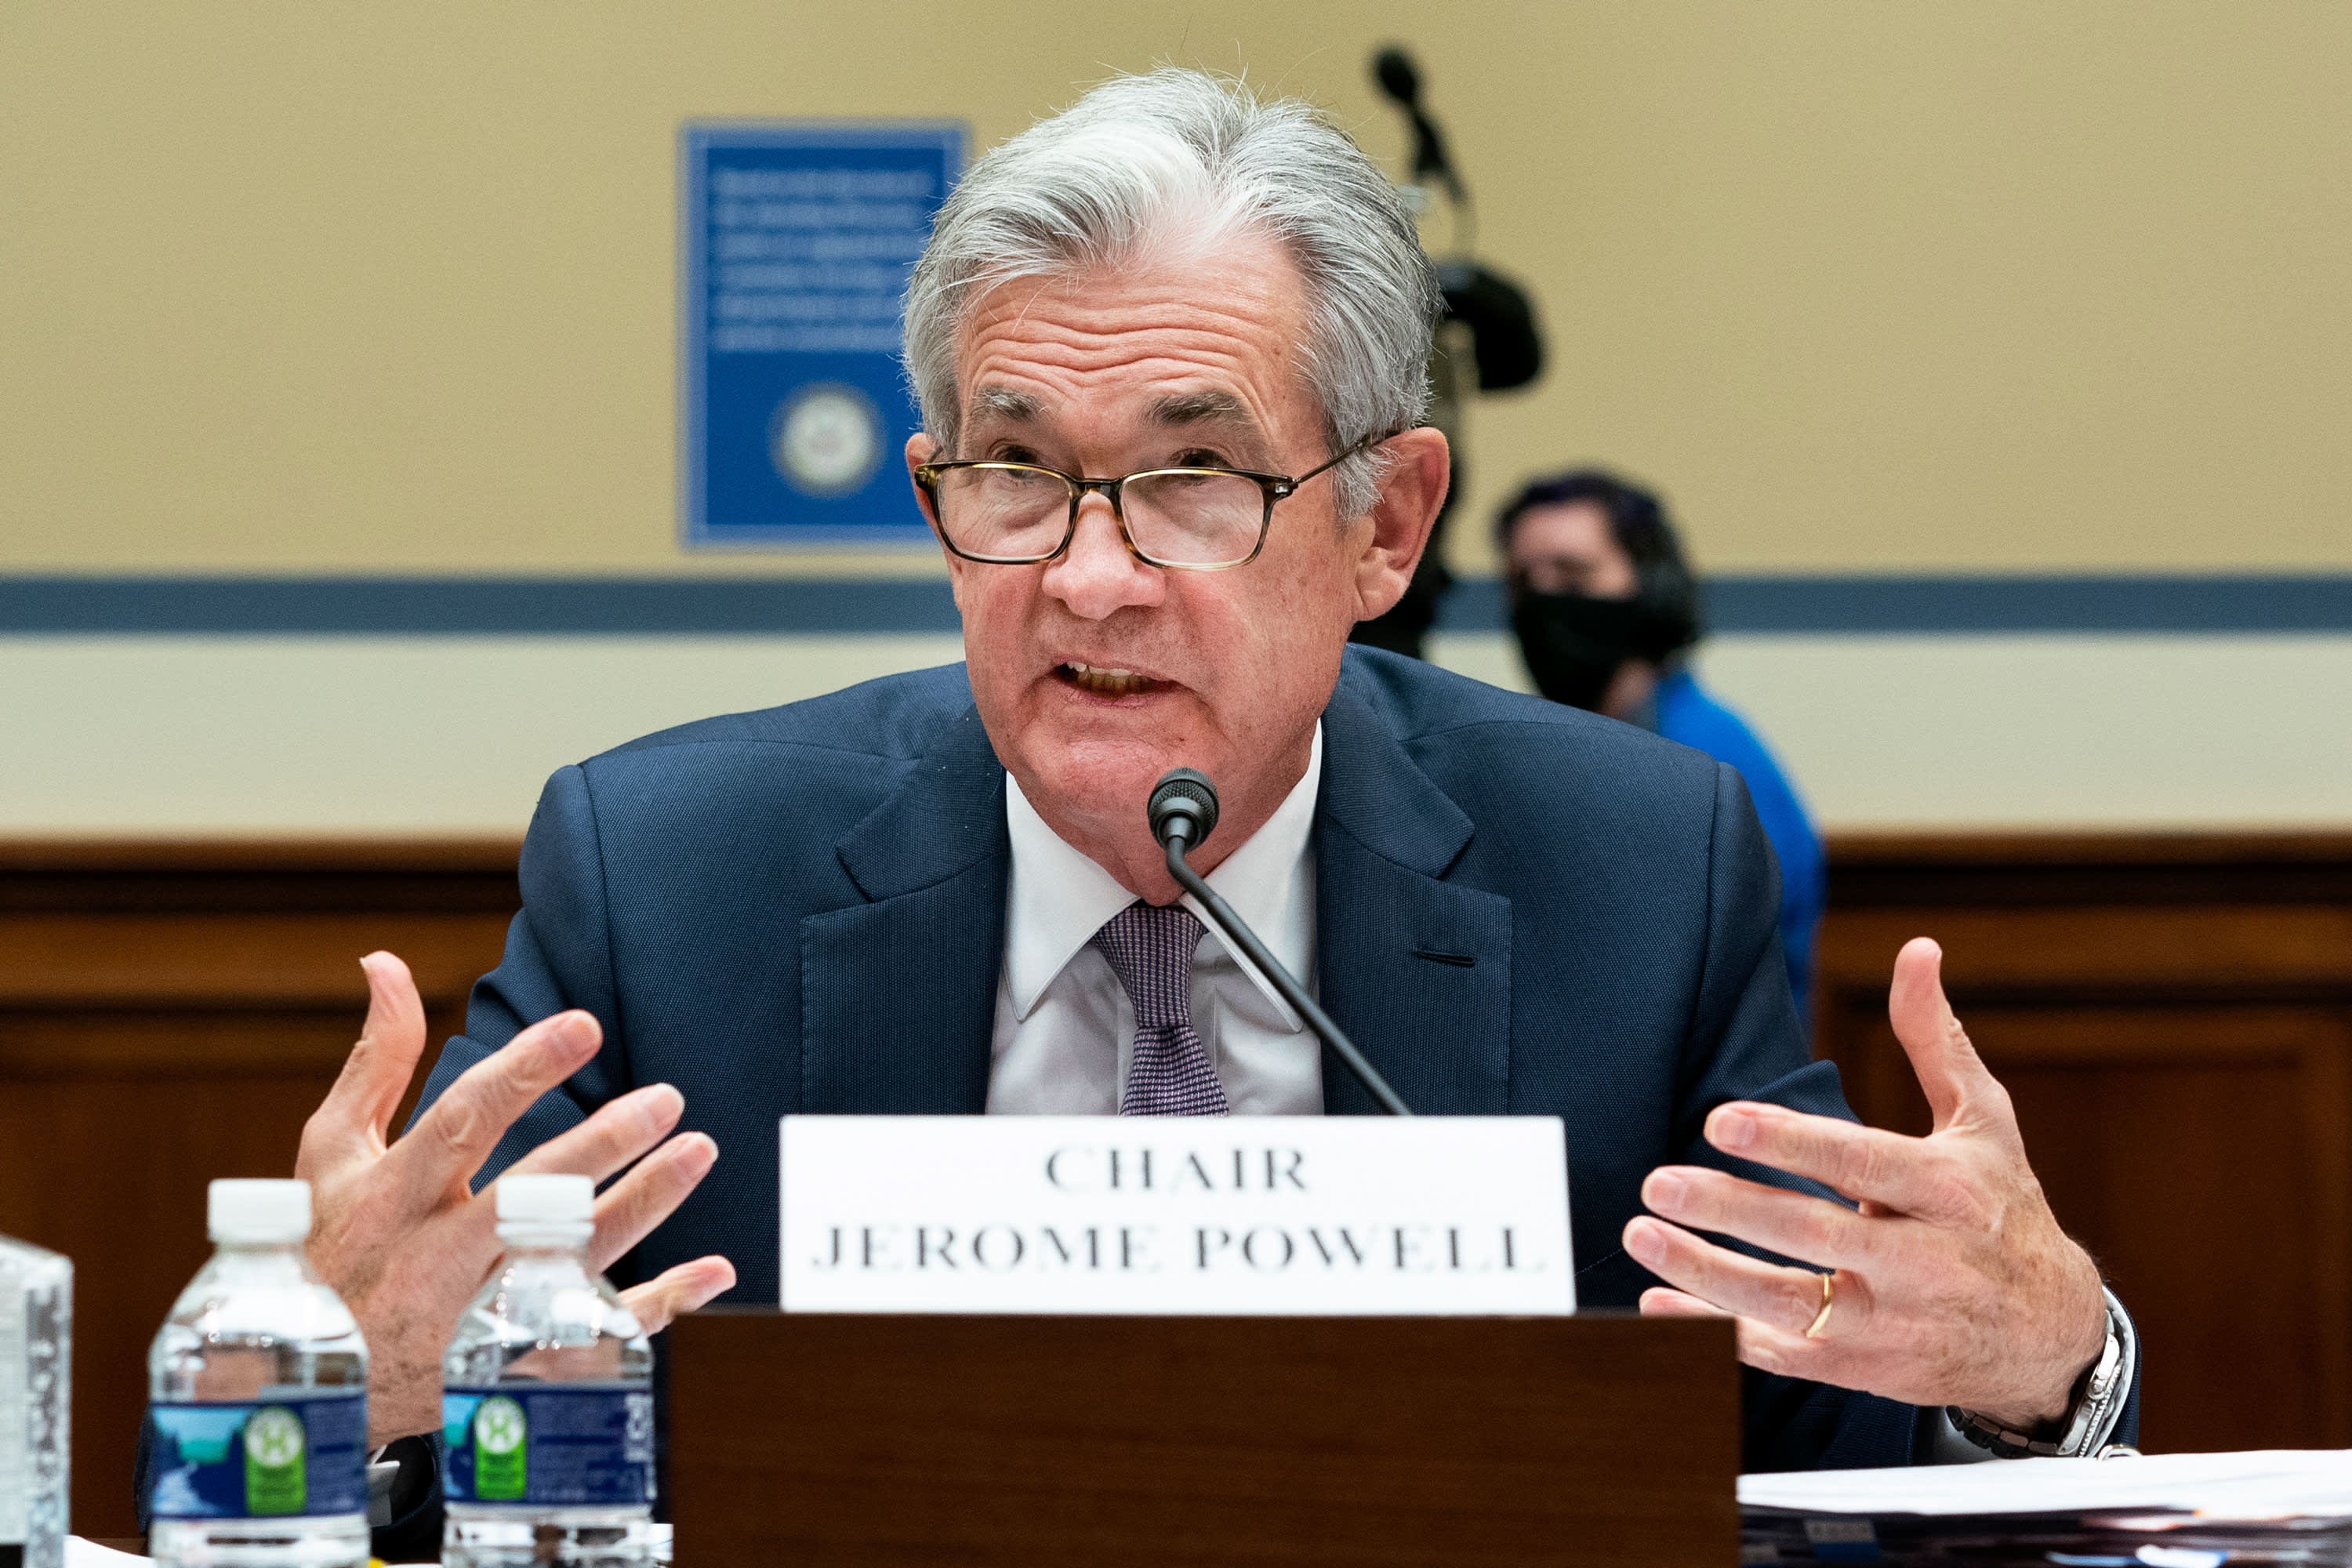 Treasury yields are declining following Powell’s economic comments